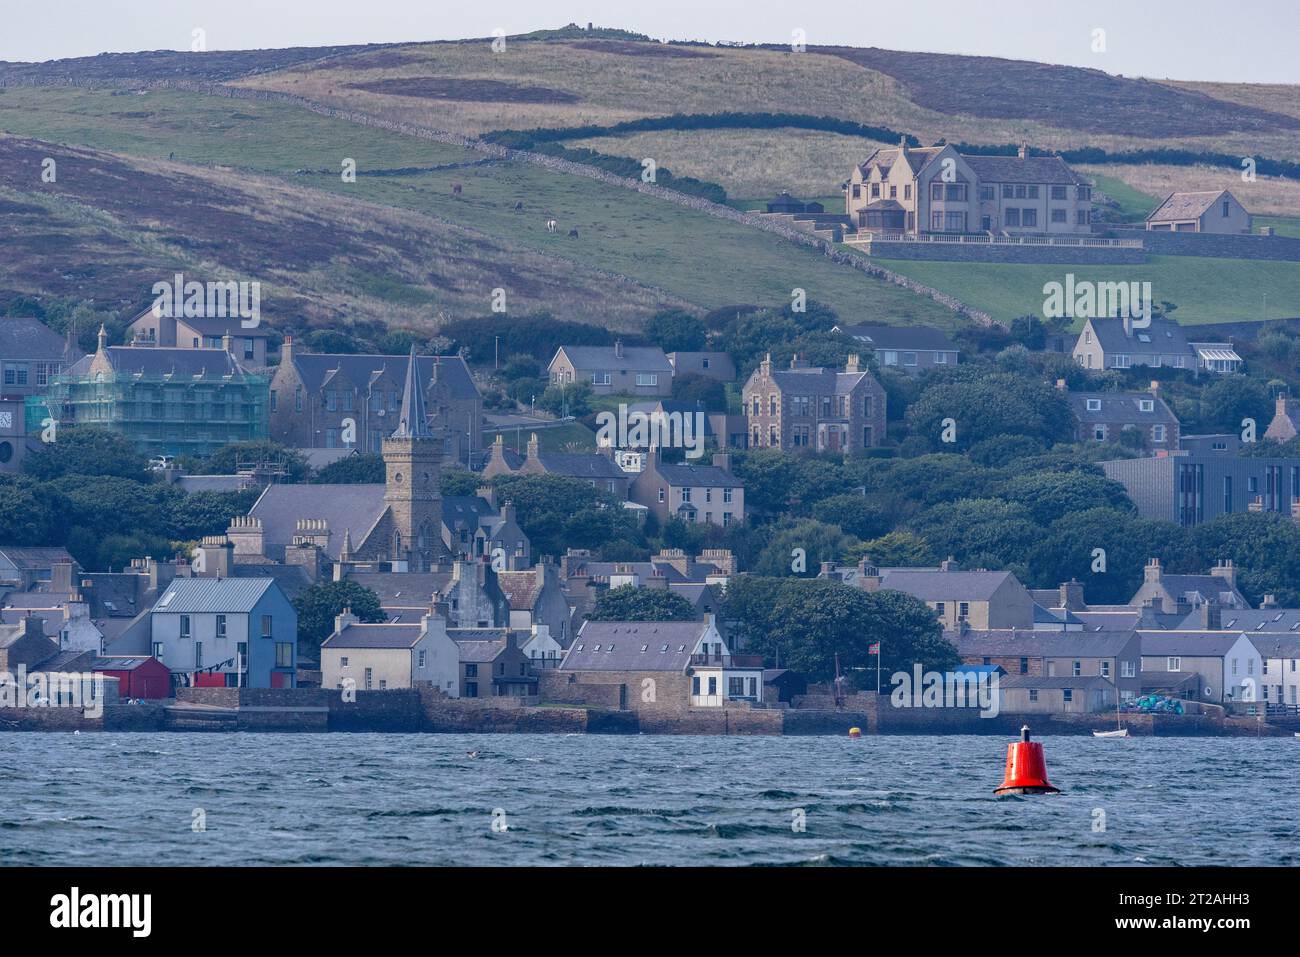 View of Stromness from Hoy Ferry, Orkney Islands, Scotland, UK Stock Photo